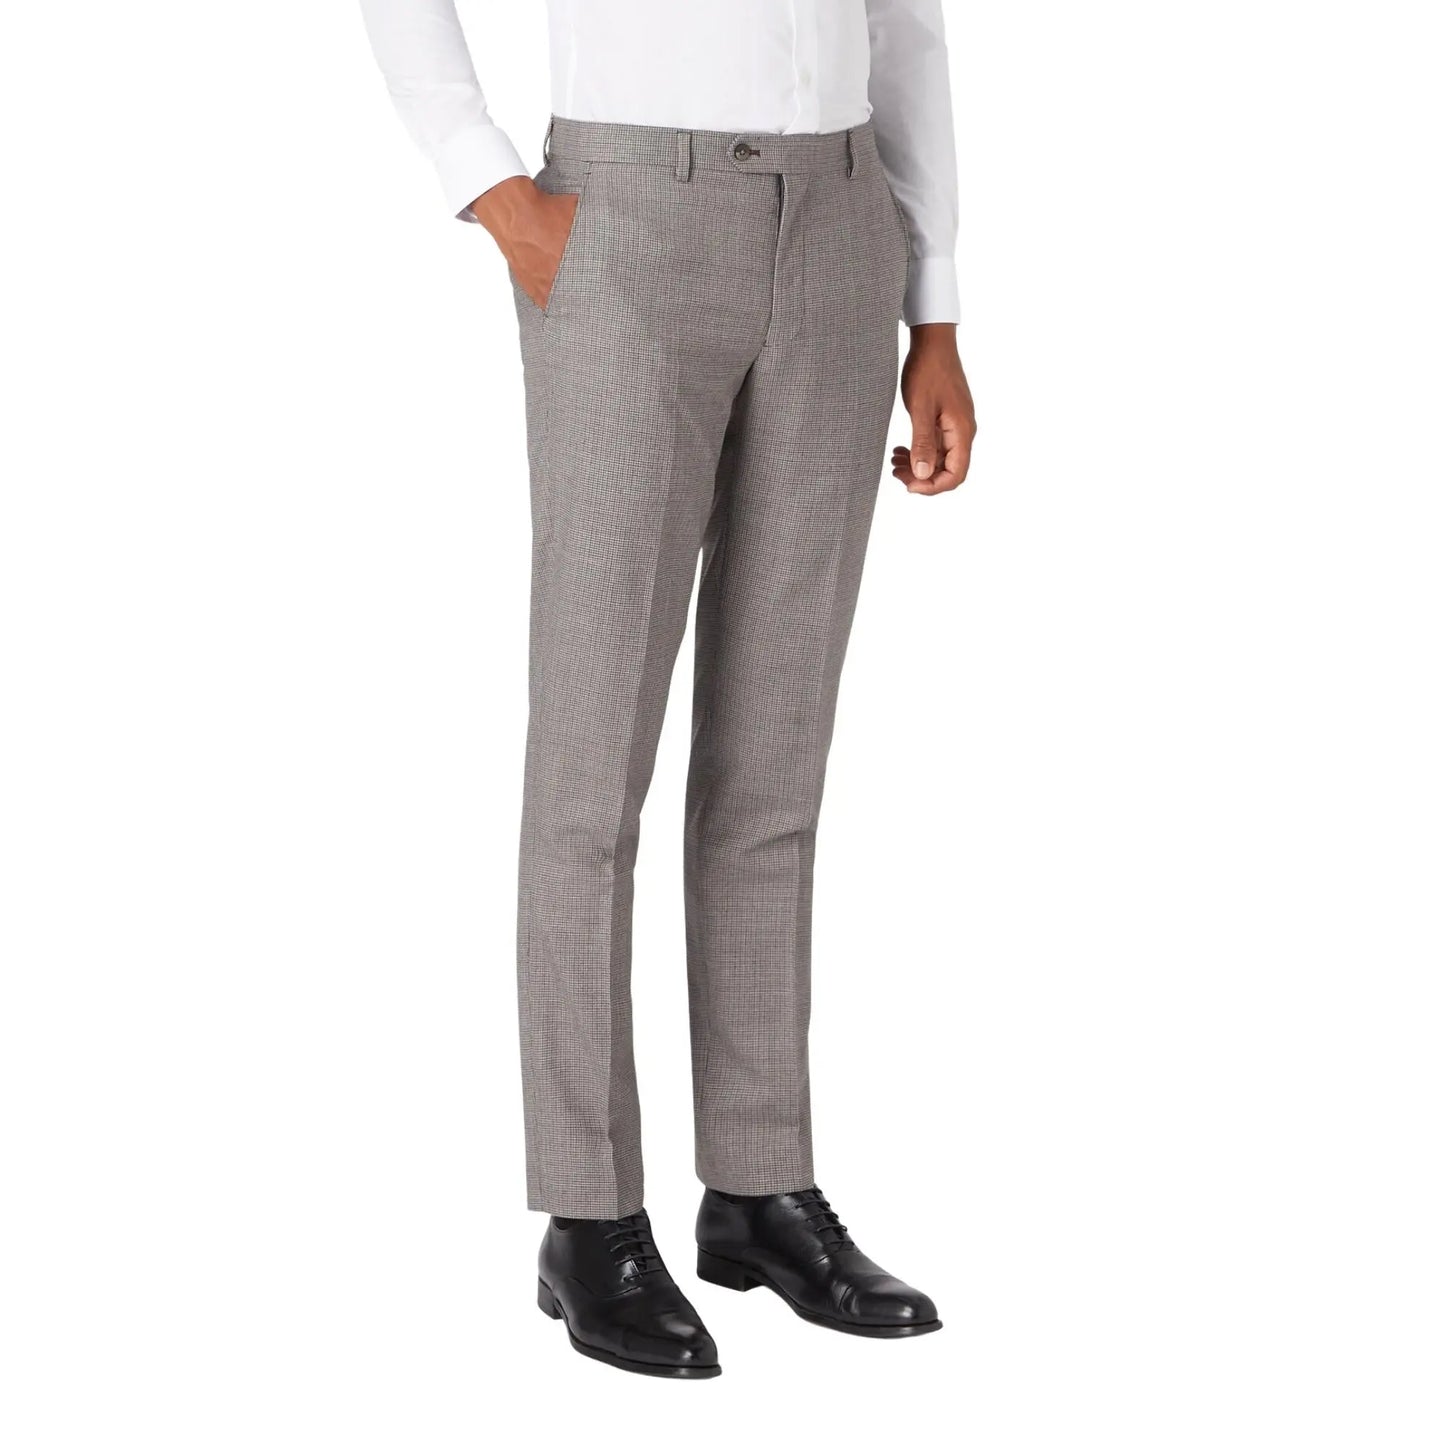 Buy Remus Uomo Lazio Houndstooth Suit Trouser - Beige | Suit Trouserss at Woven Durham